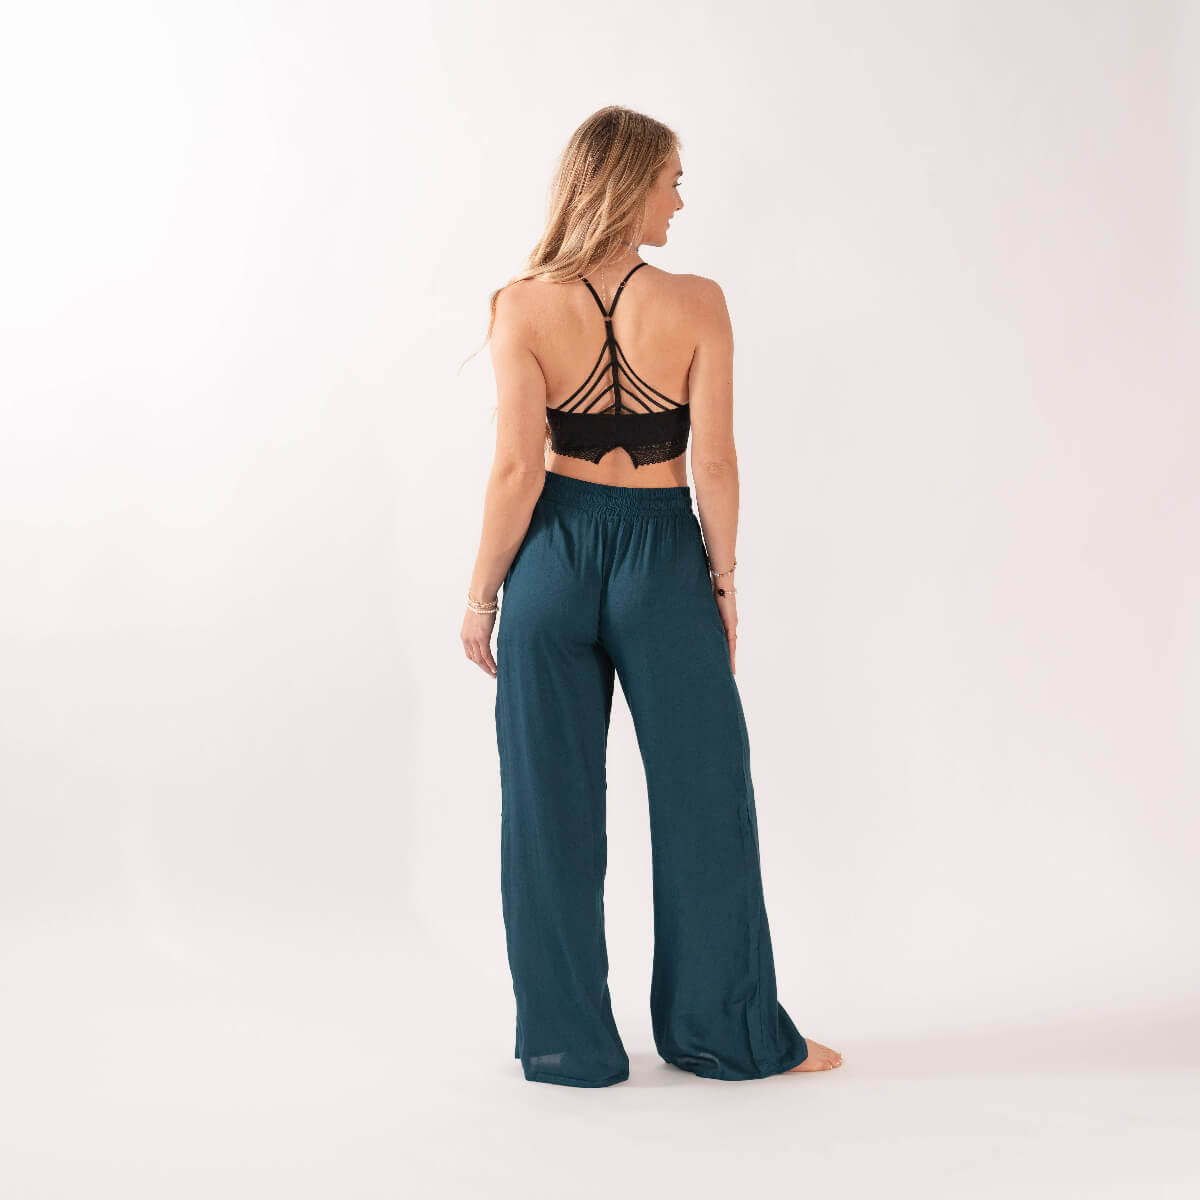 Women's Boho Wide Leg Pants with Pockets in Teal - Size L – Elle and Willow